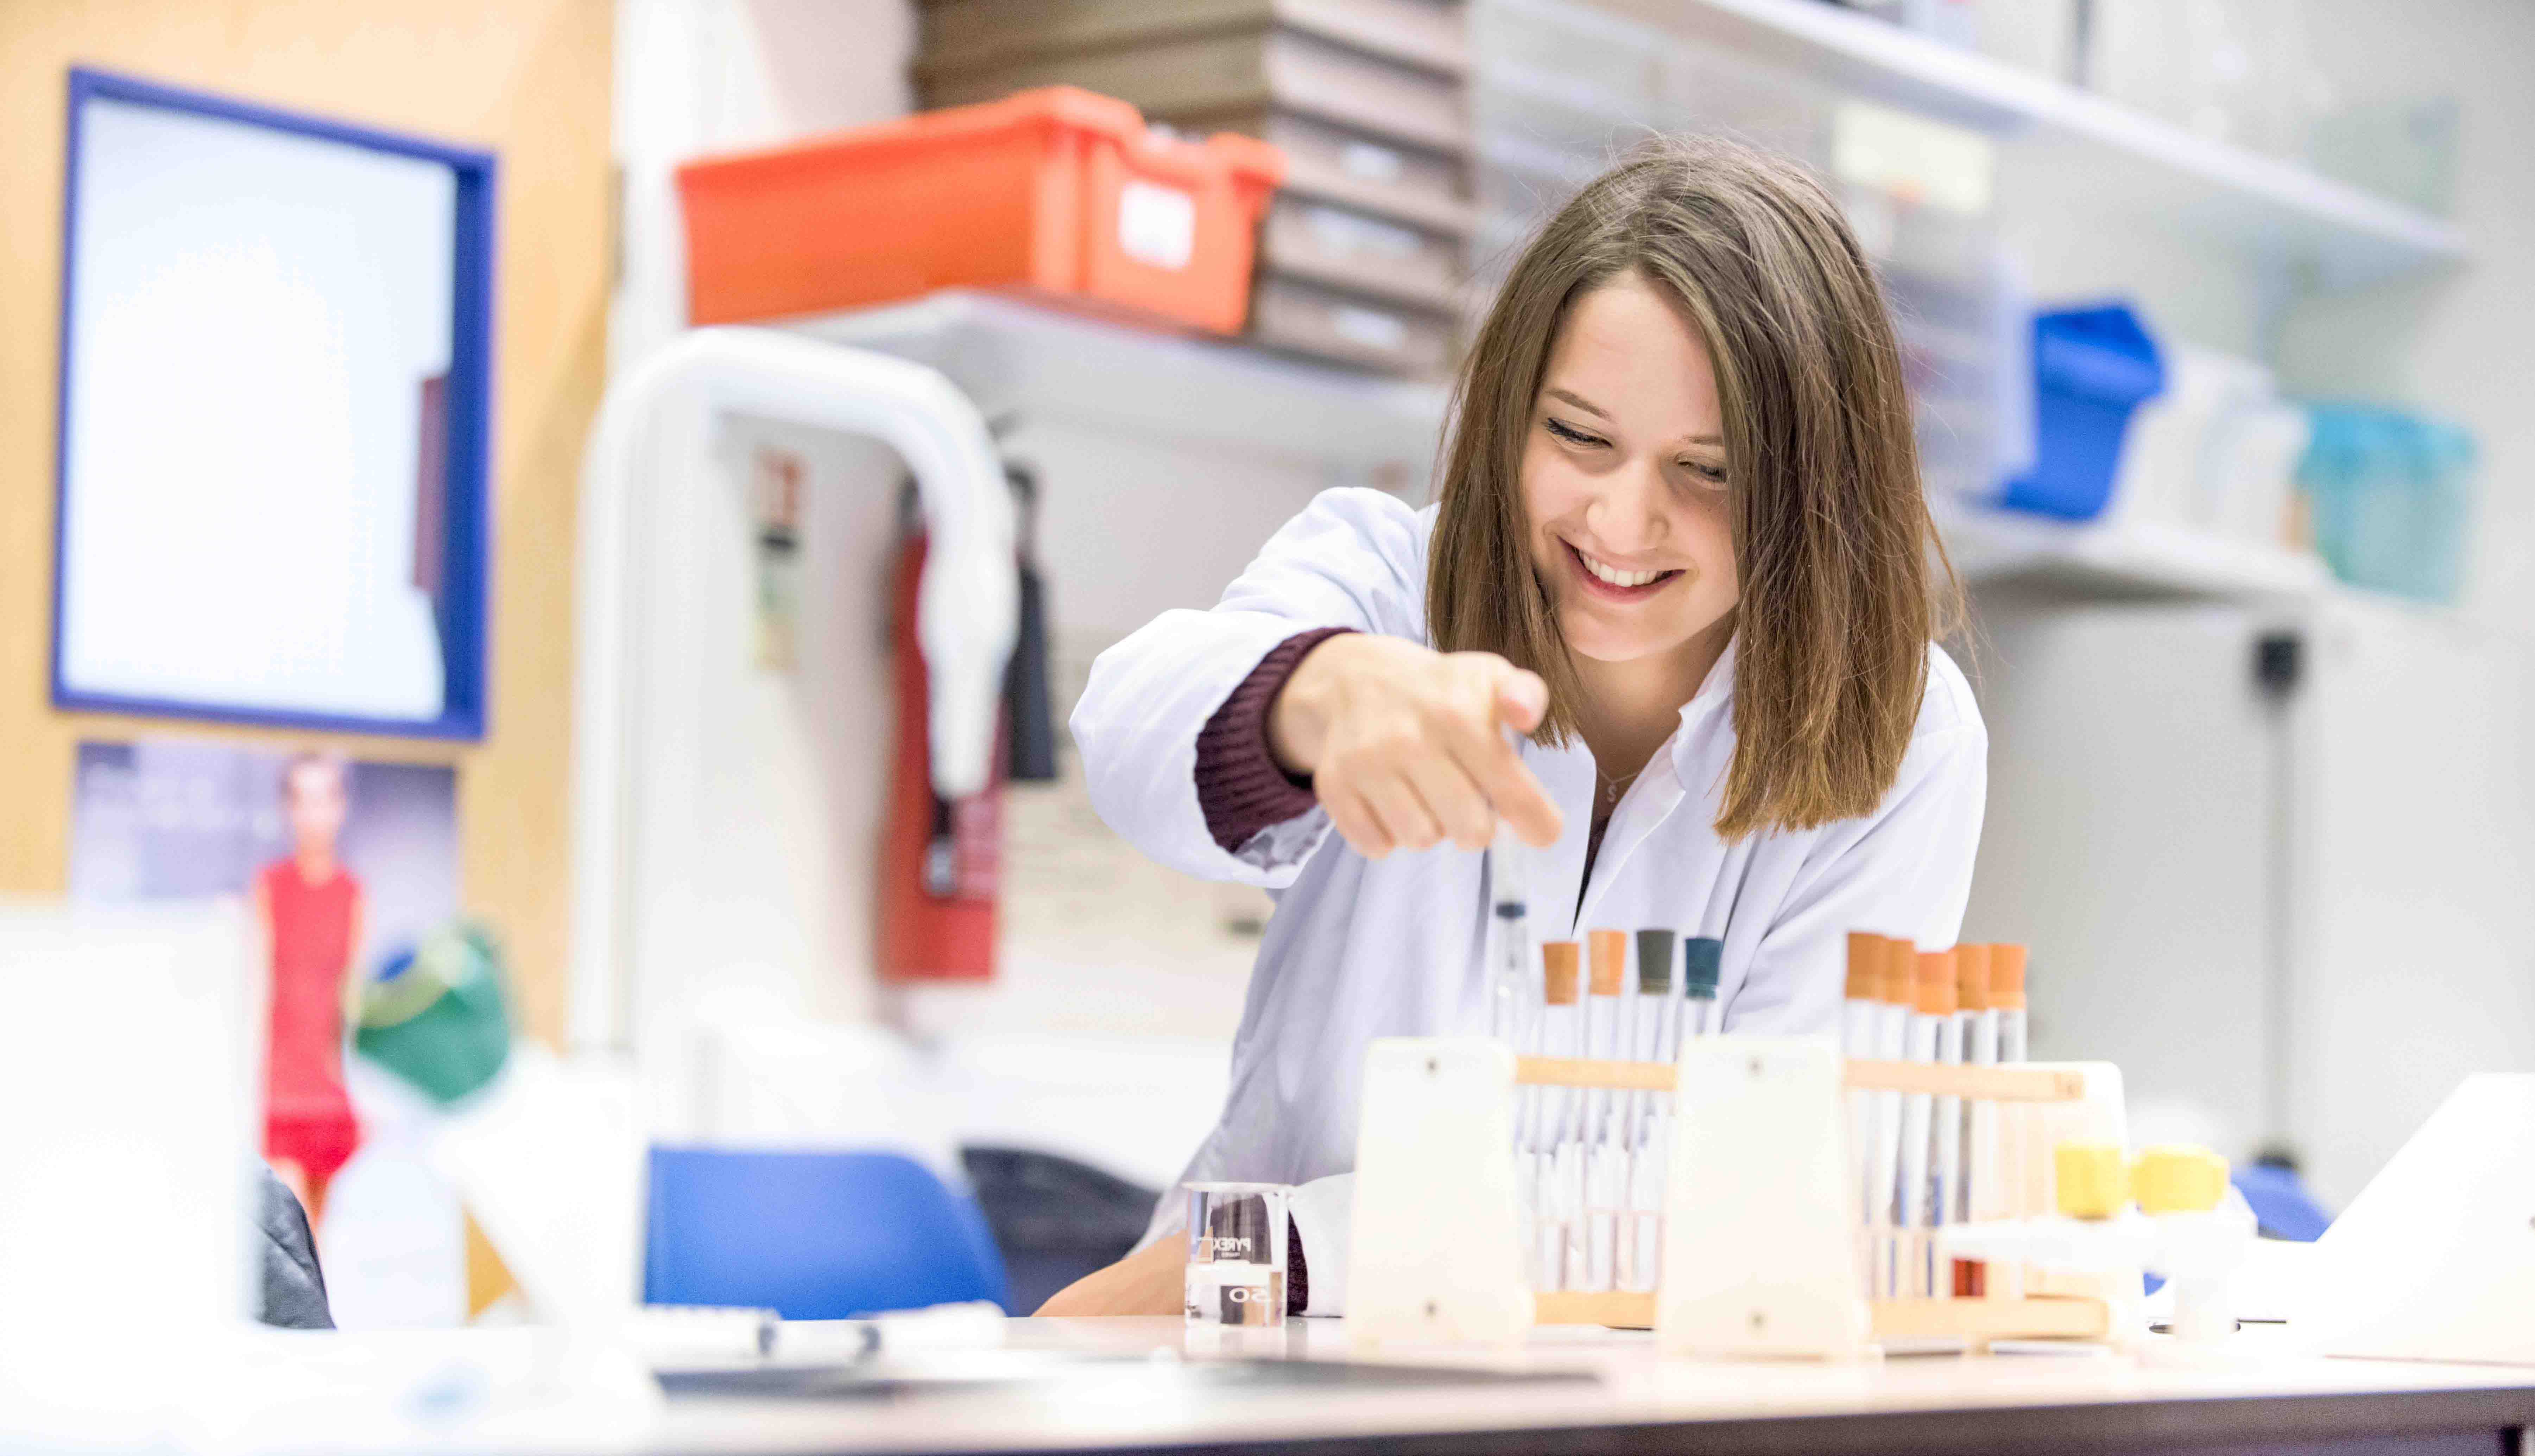 Students seek partnerships to support women in science, technology, engineering and maths 